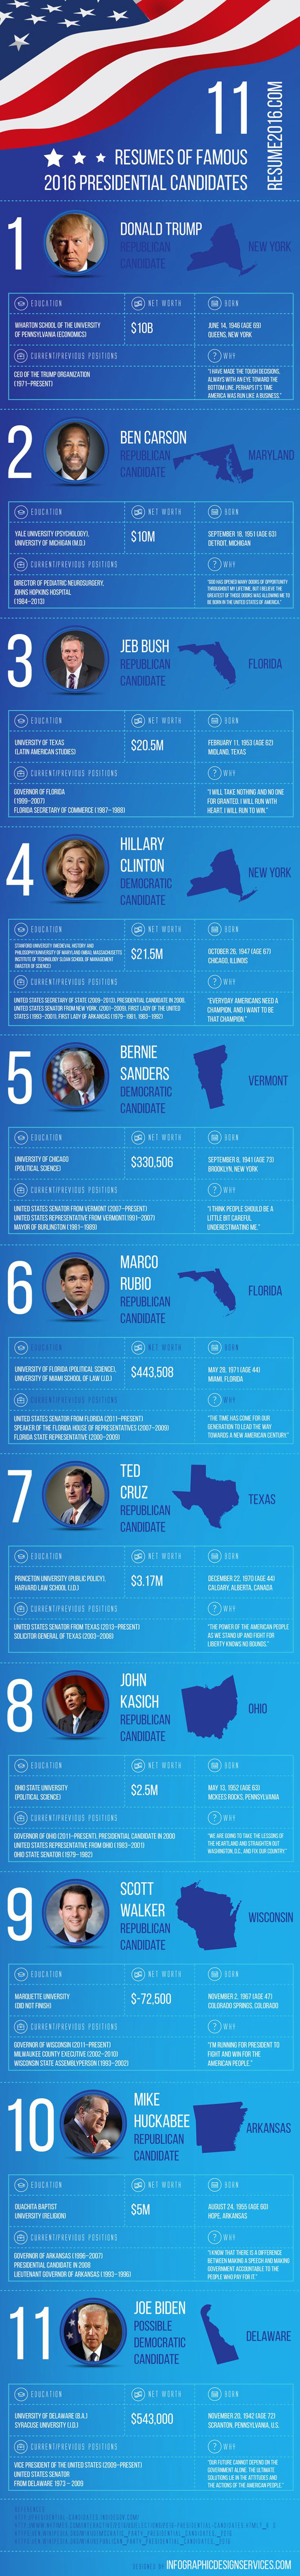 Resumes of Famous 2016 Presidential Candidates Infographic